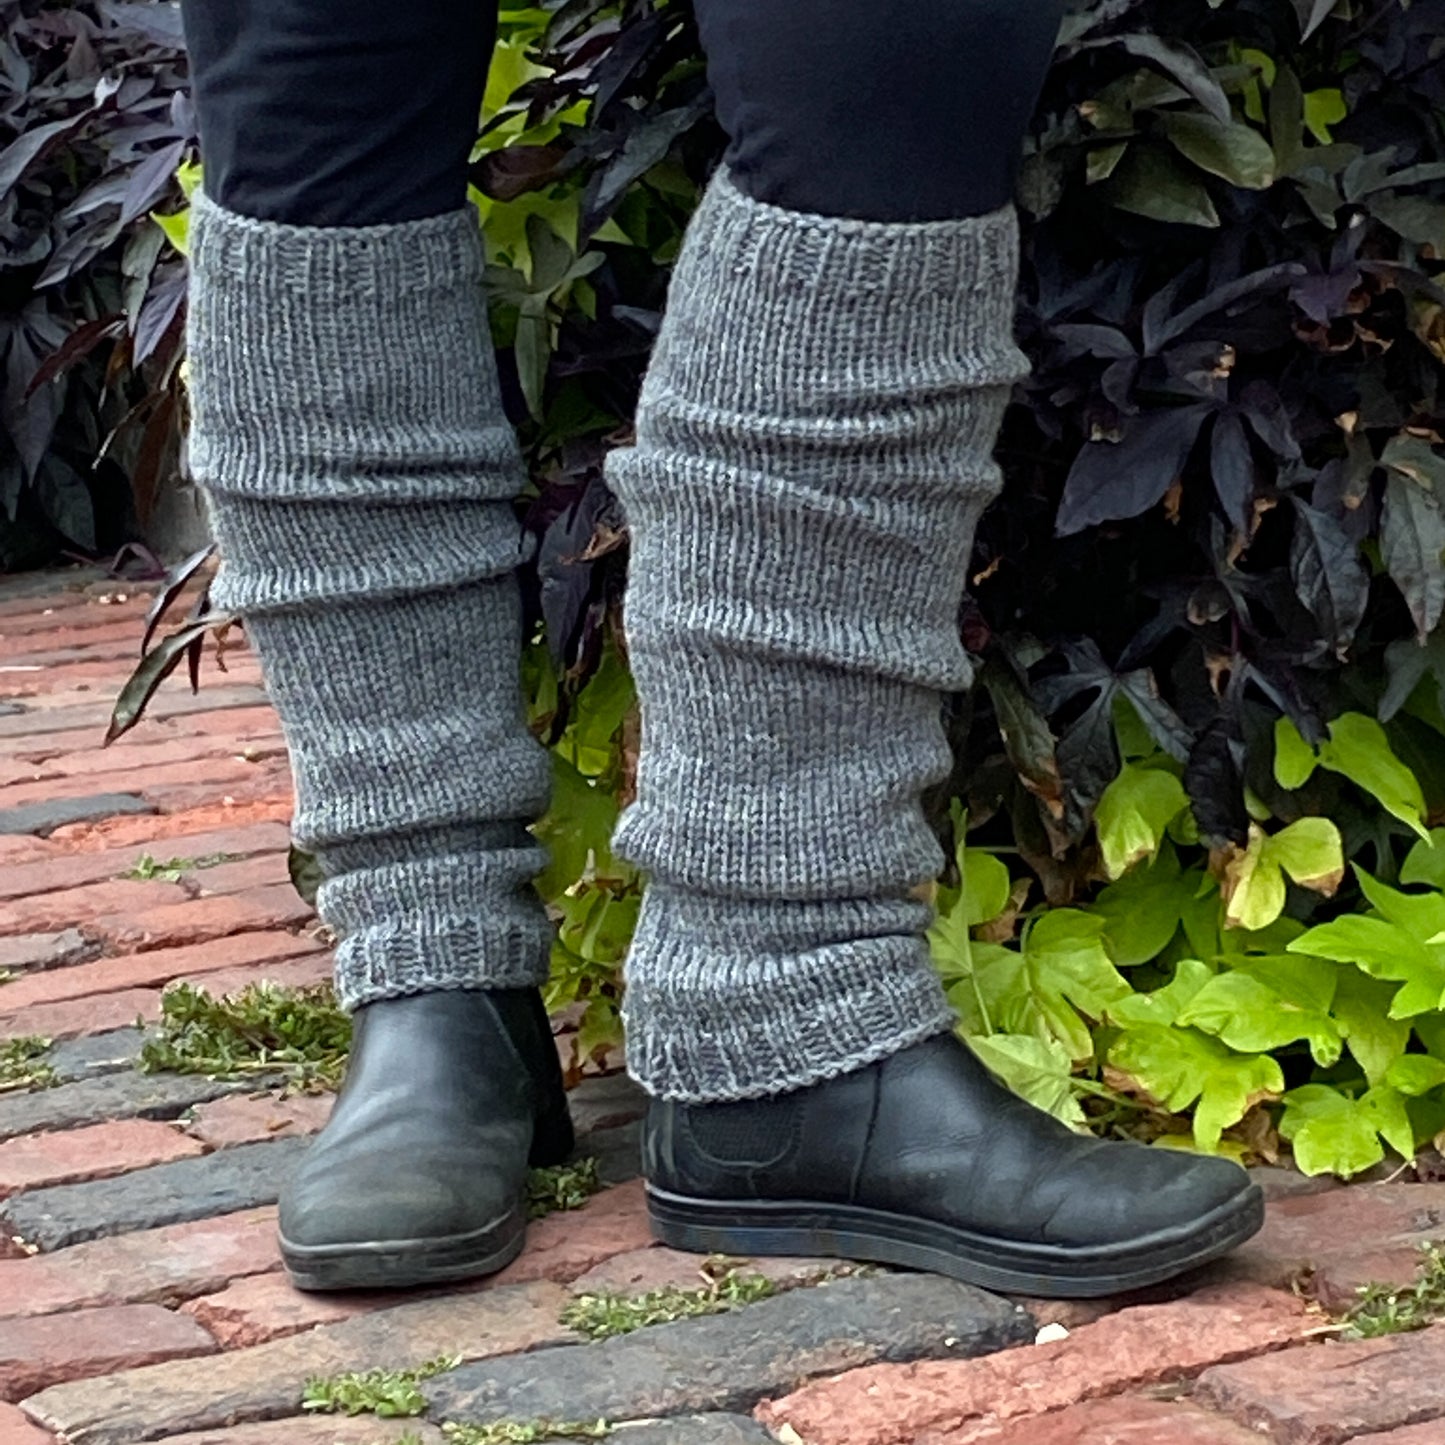 fvwitlyh Mg725 Snap on Leg Warmers Knitted Wool Like Boots Woolen